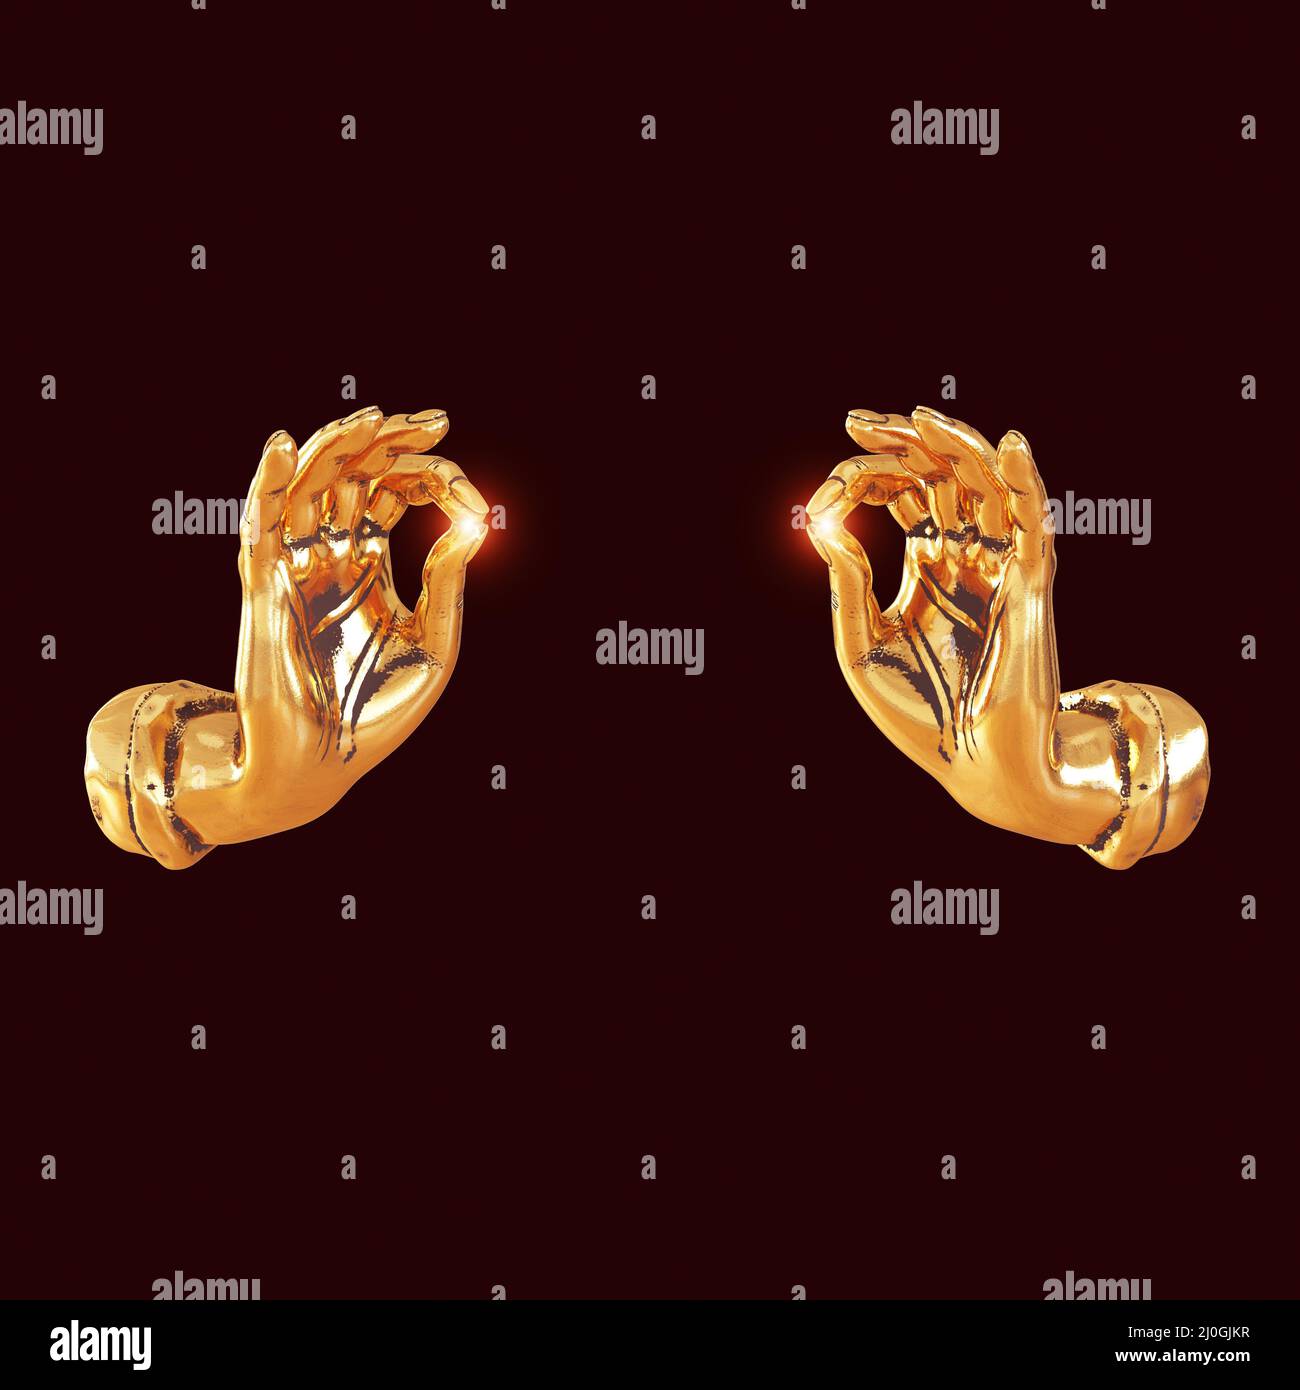 Two golden hands with glow in the fingers on a burgundy background. 3d rendering Stock Photo